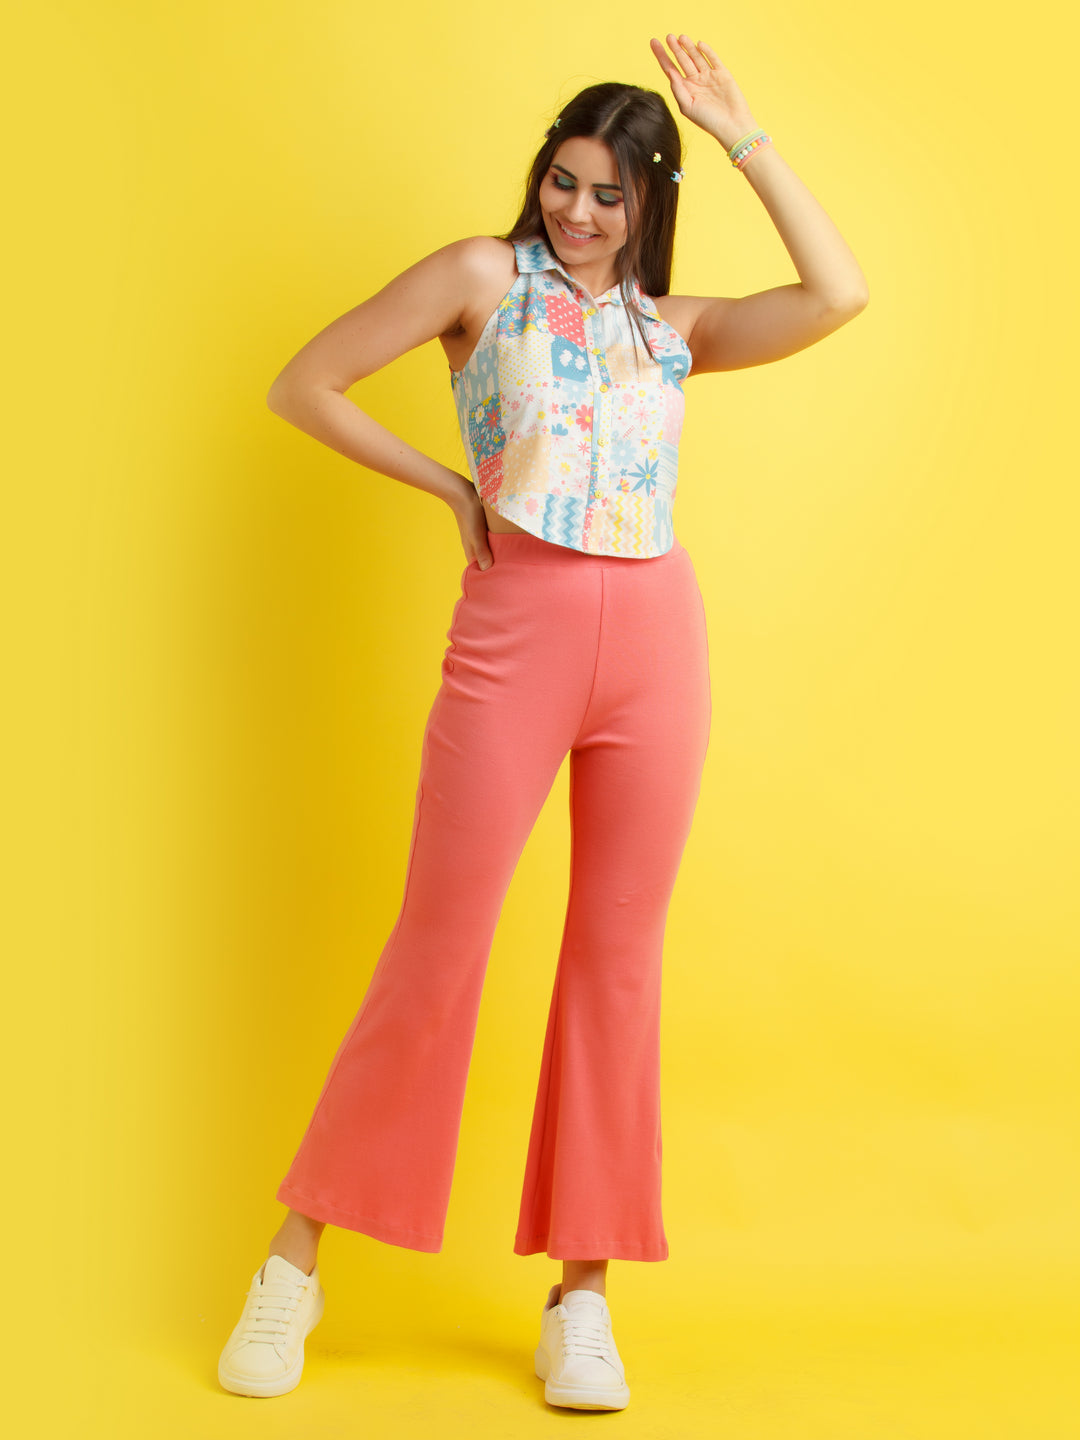 Pink Solid Pants For Women – Zink London